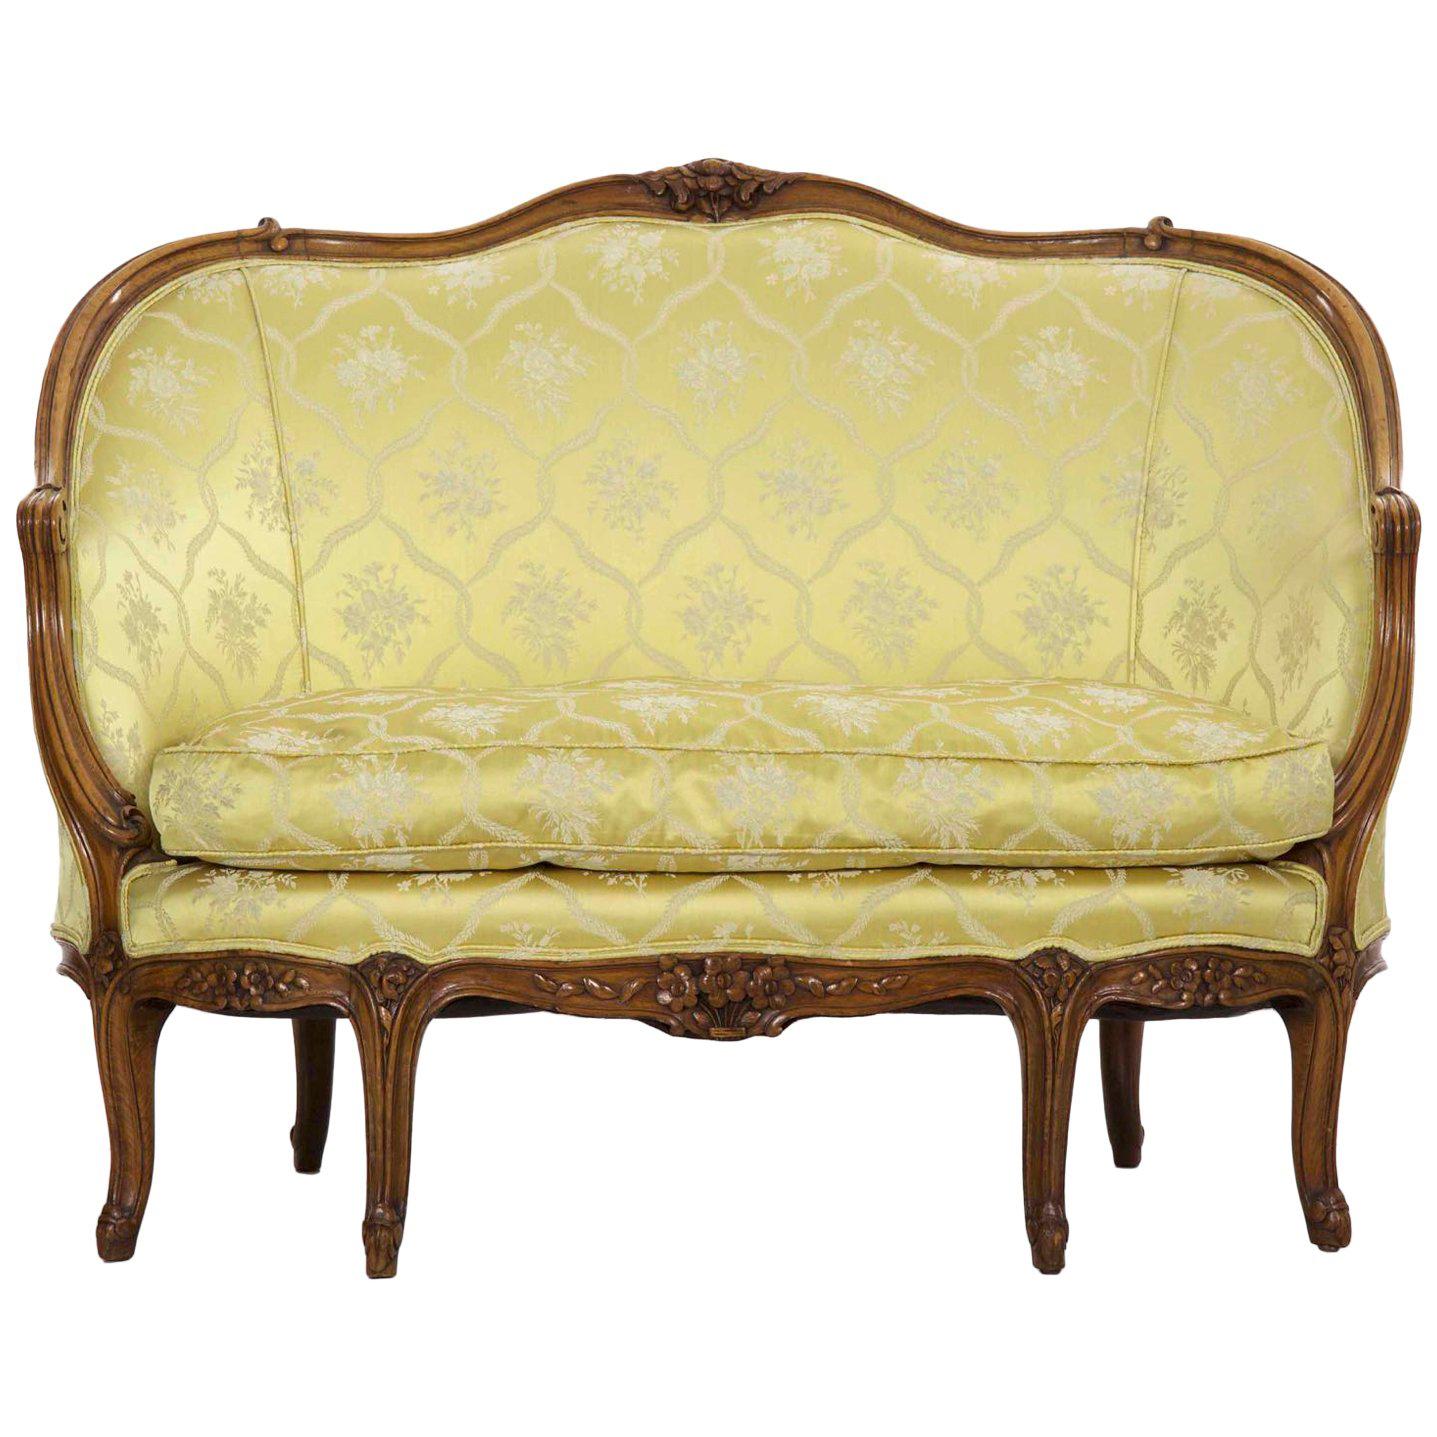 19th Century French Louis XV Style Antique Canapé Sofa Settee